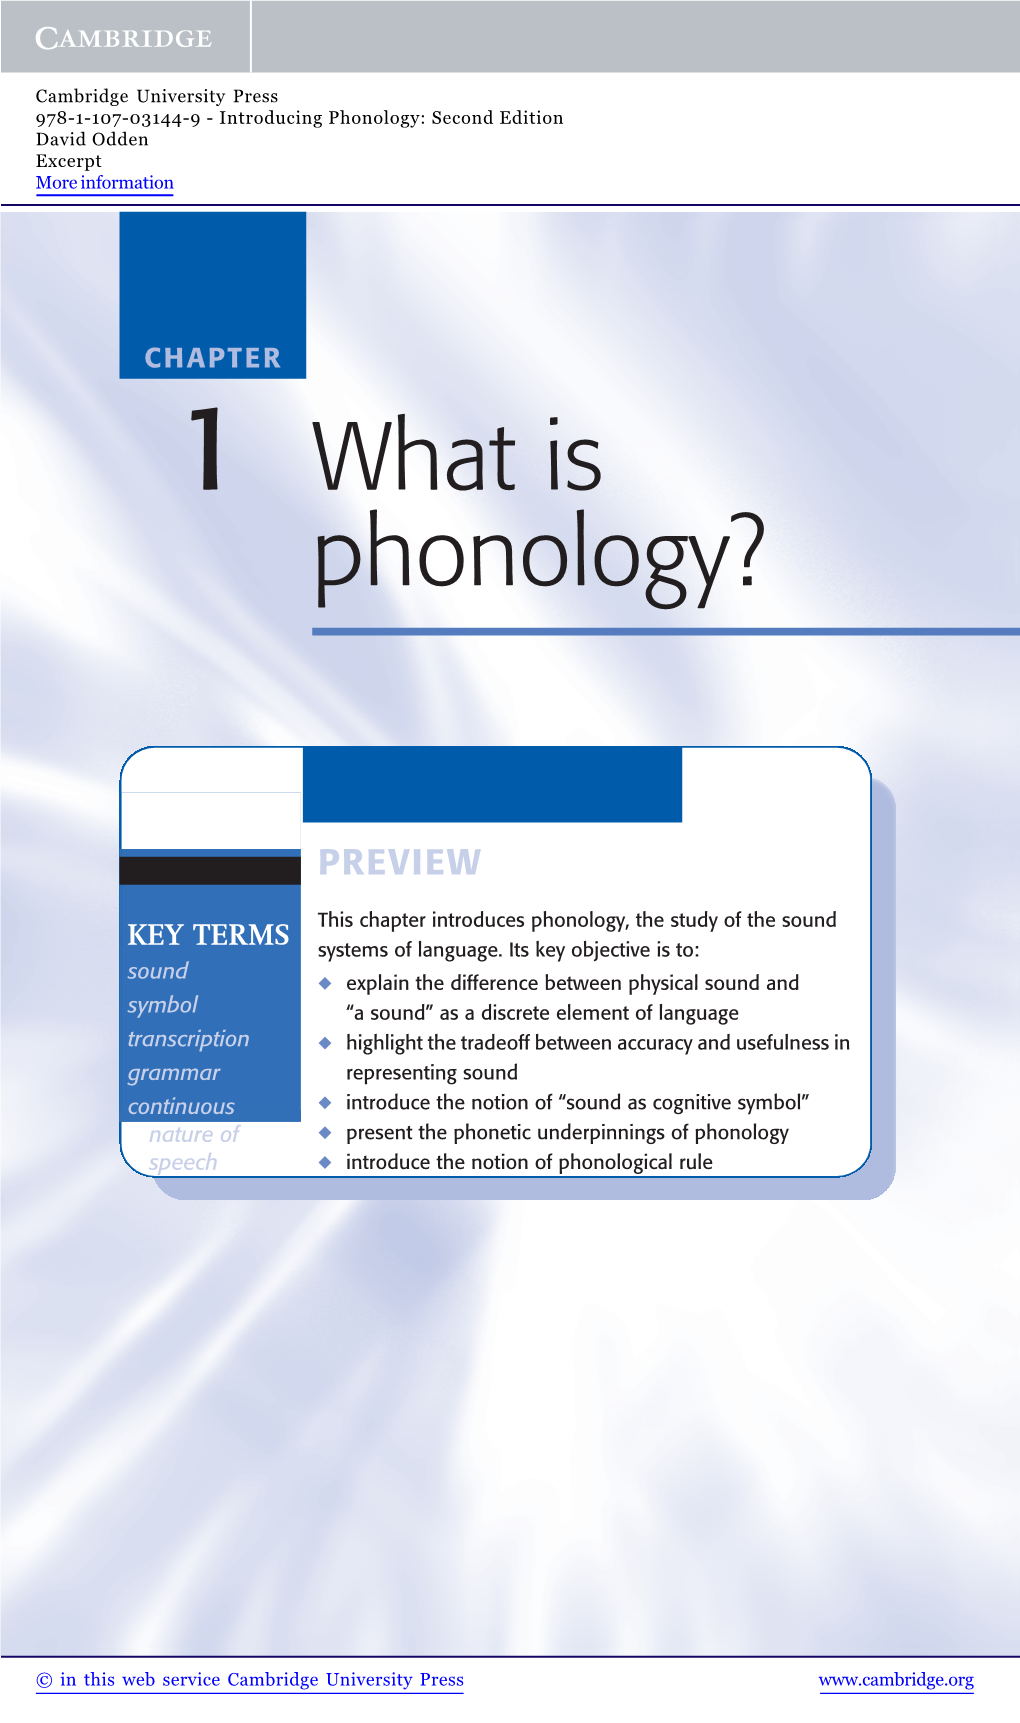 1 What Is Phonology?